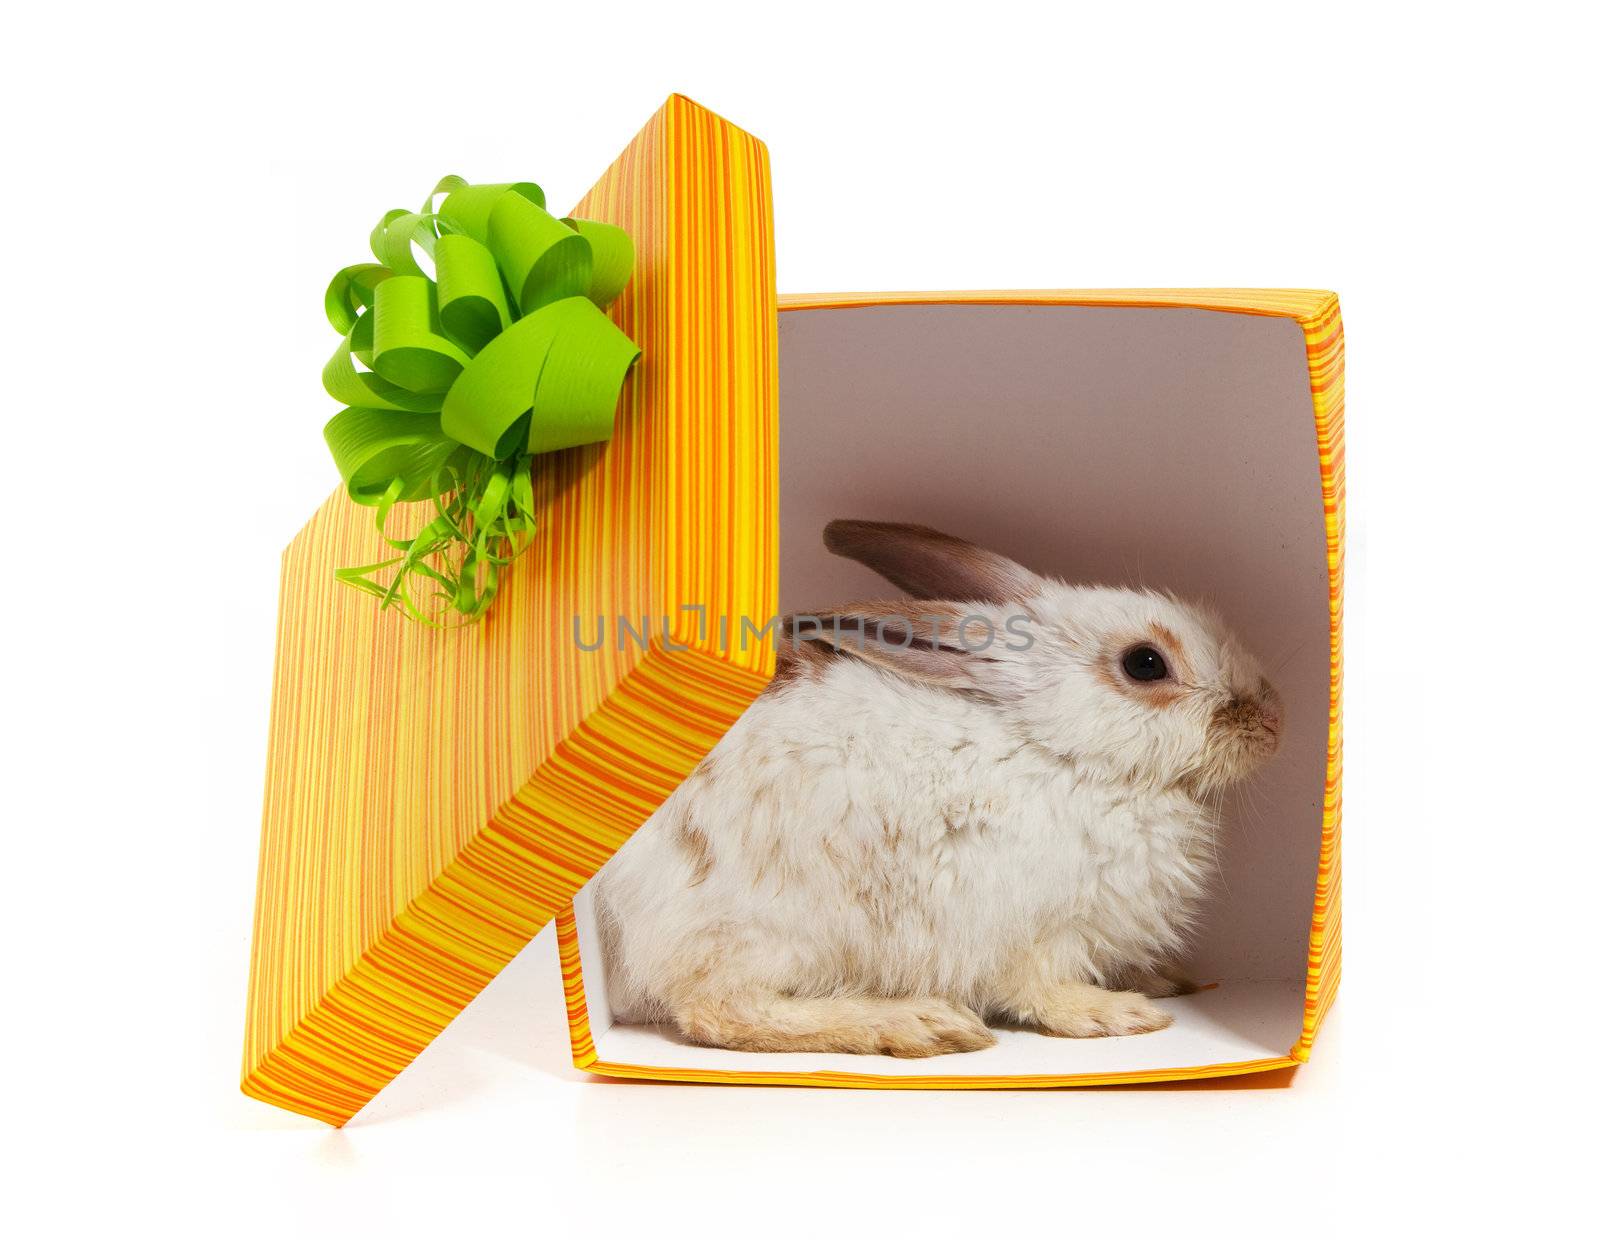 The rabbit in the yellow box with ribbon